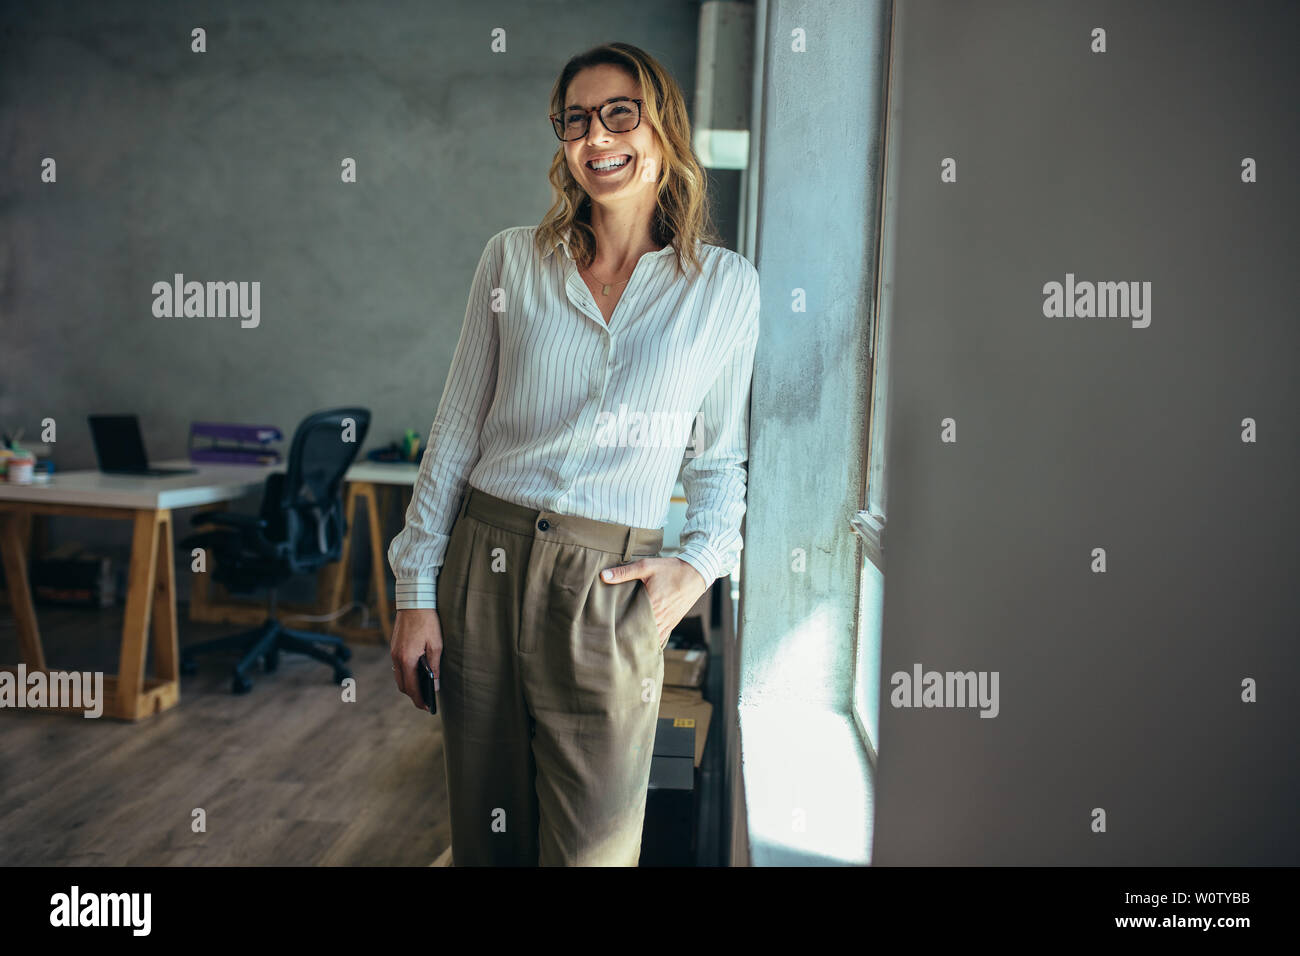 Smiling businesswoman standing in office. Online business owner in casuals standing by window in office looking away and smiling. Stock Photo